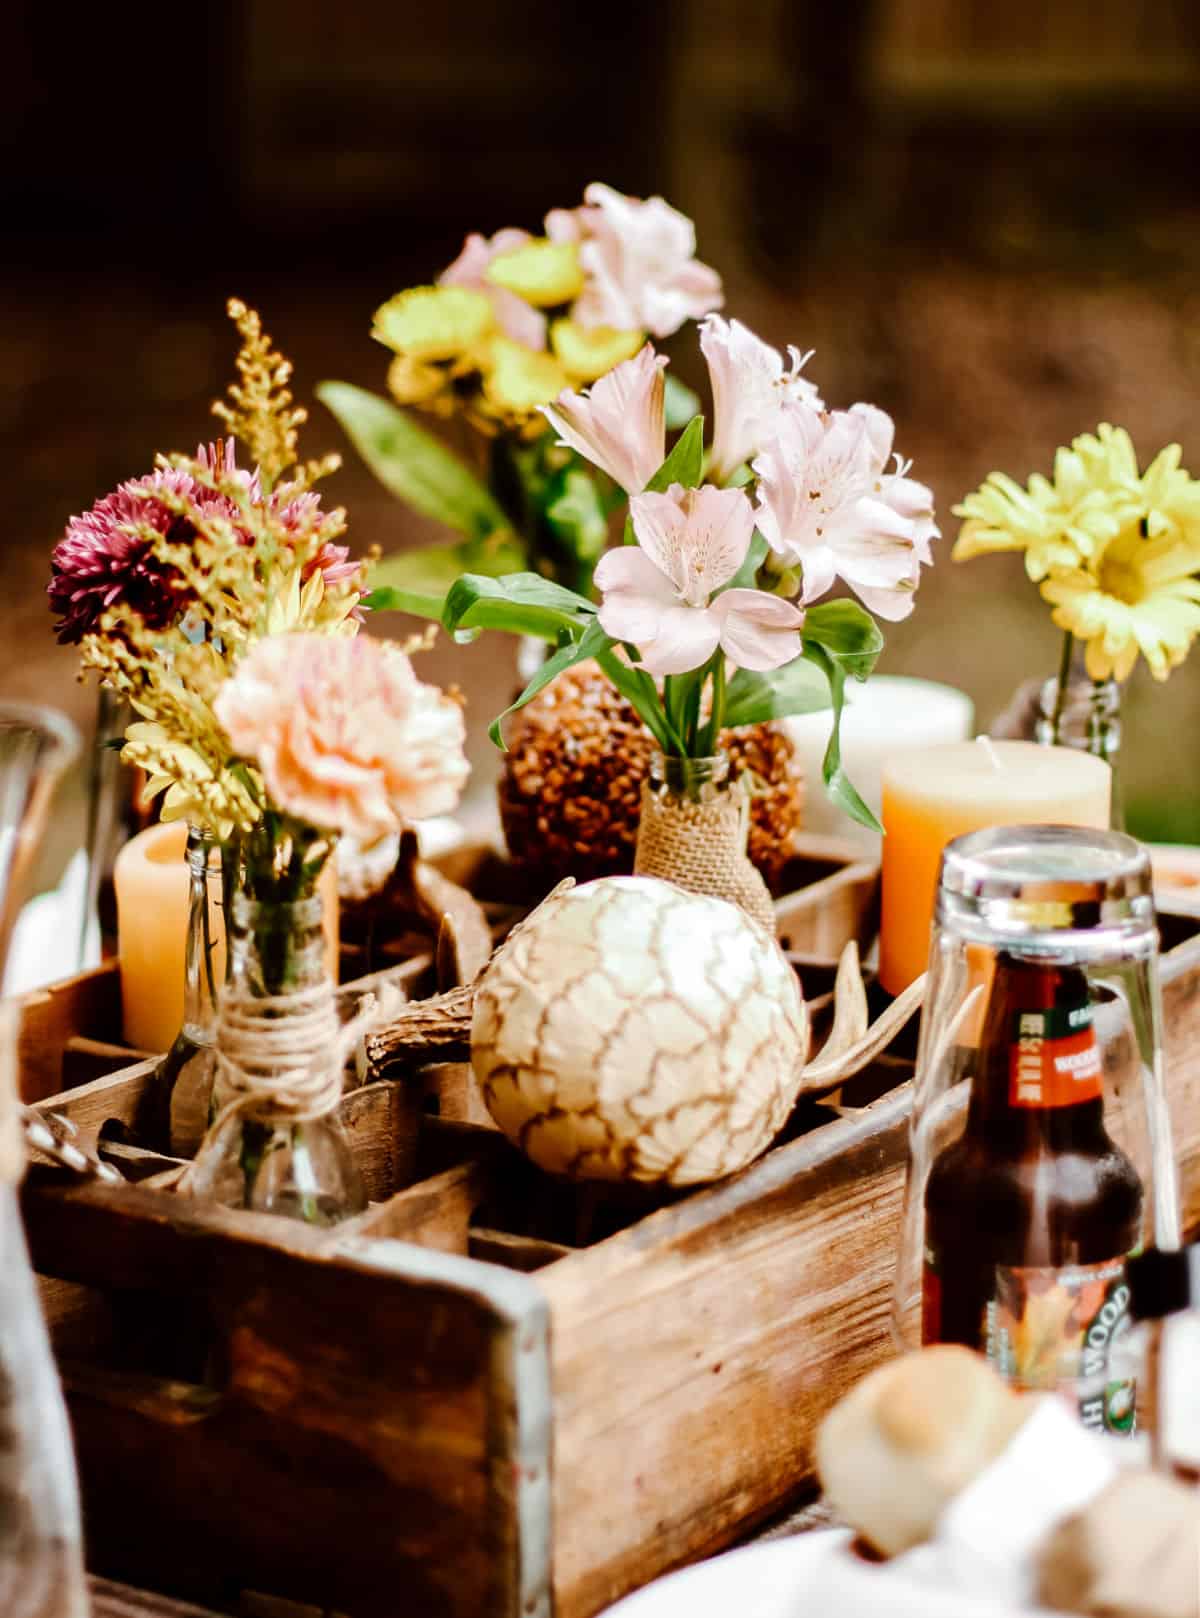 vintage bottle crate with bottles filled with flowers as a centerpiece